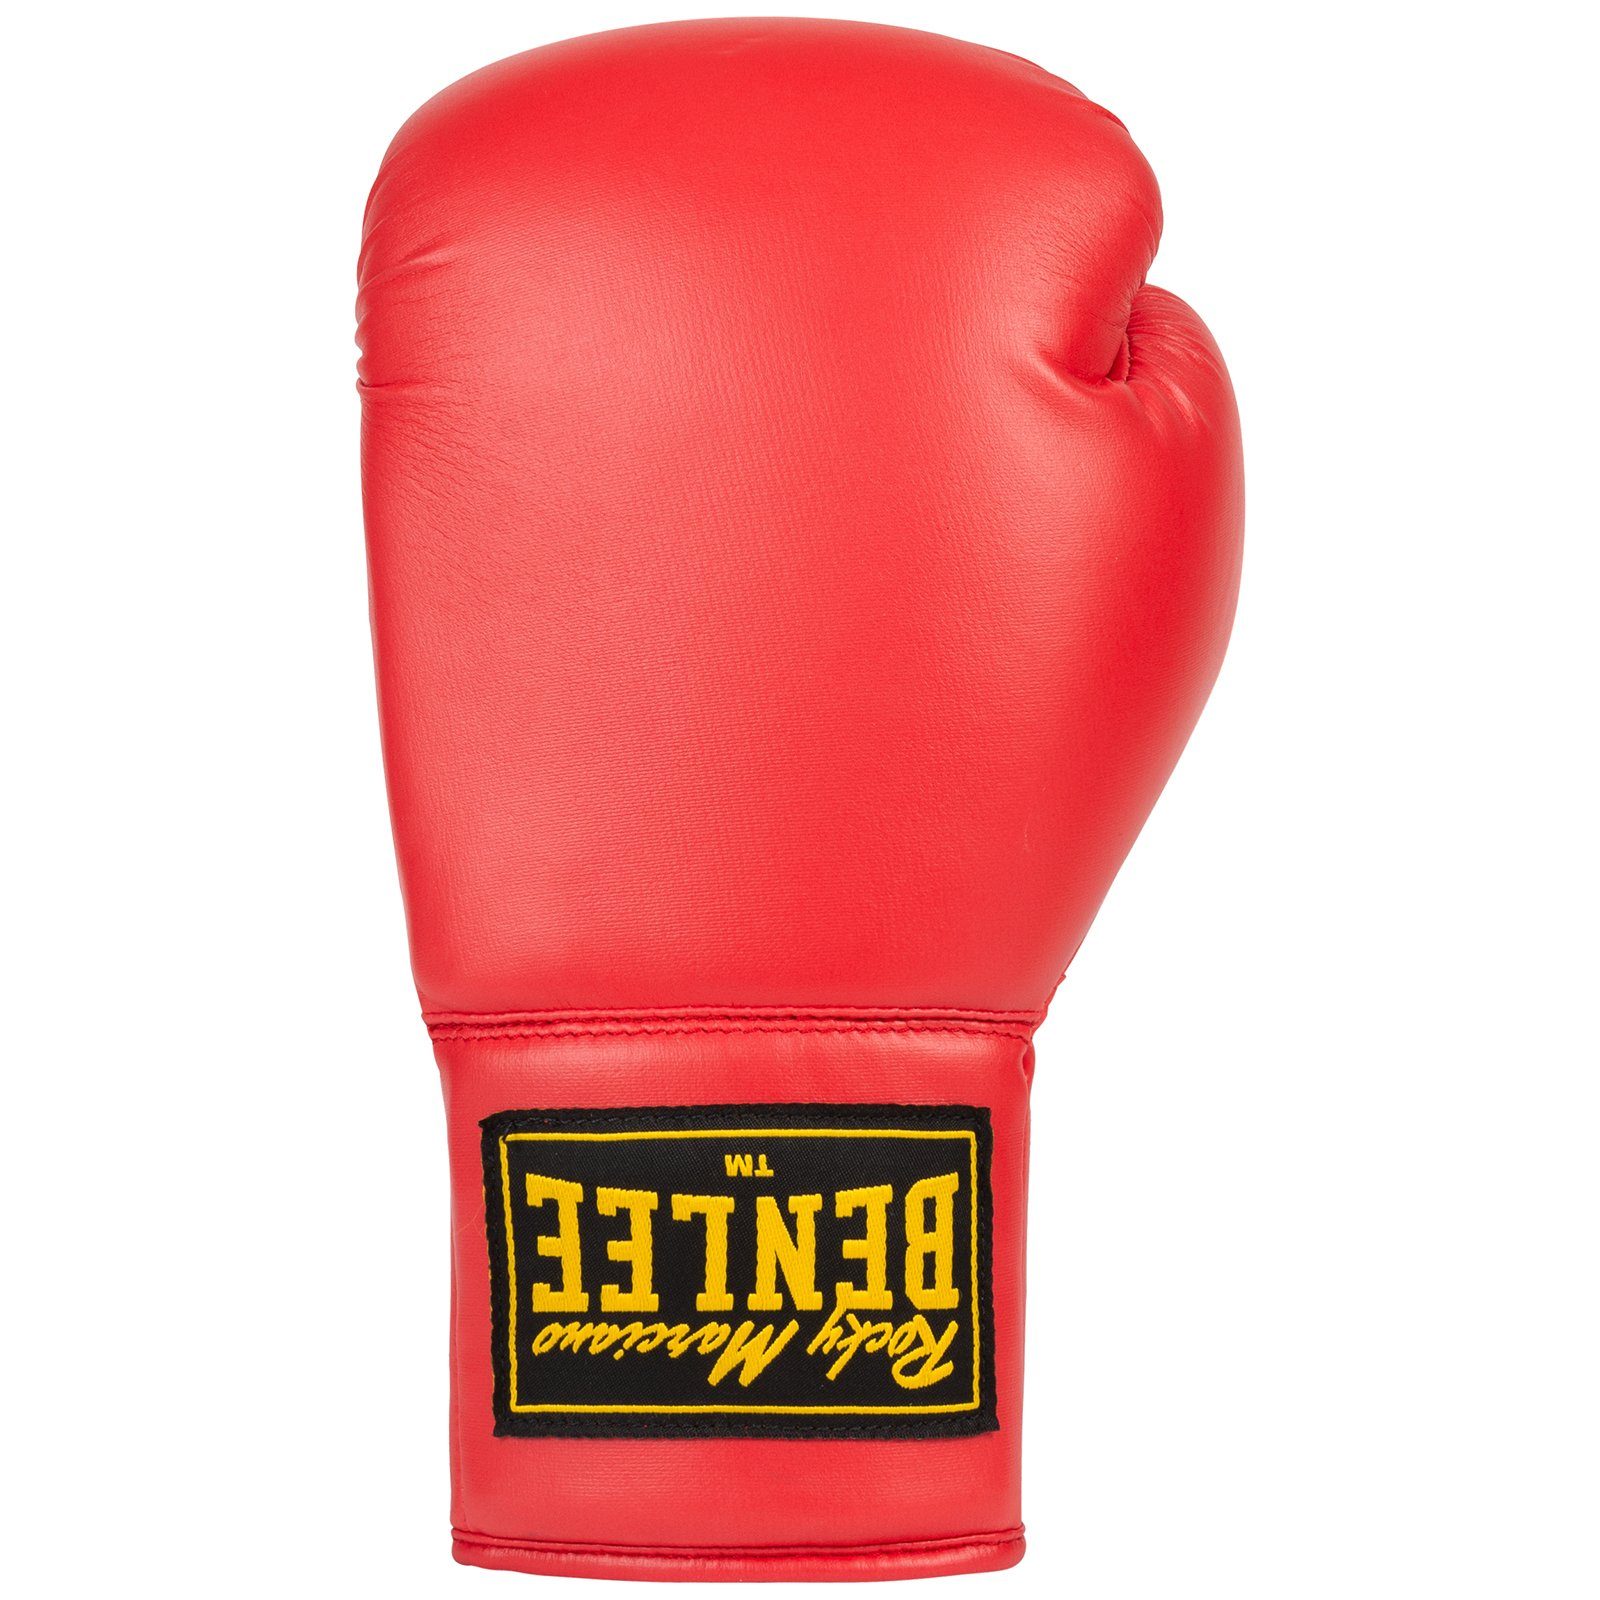 Benlee Rocky Marciano Boxhandschuhe GLOVES AUTOGRAPH Red